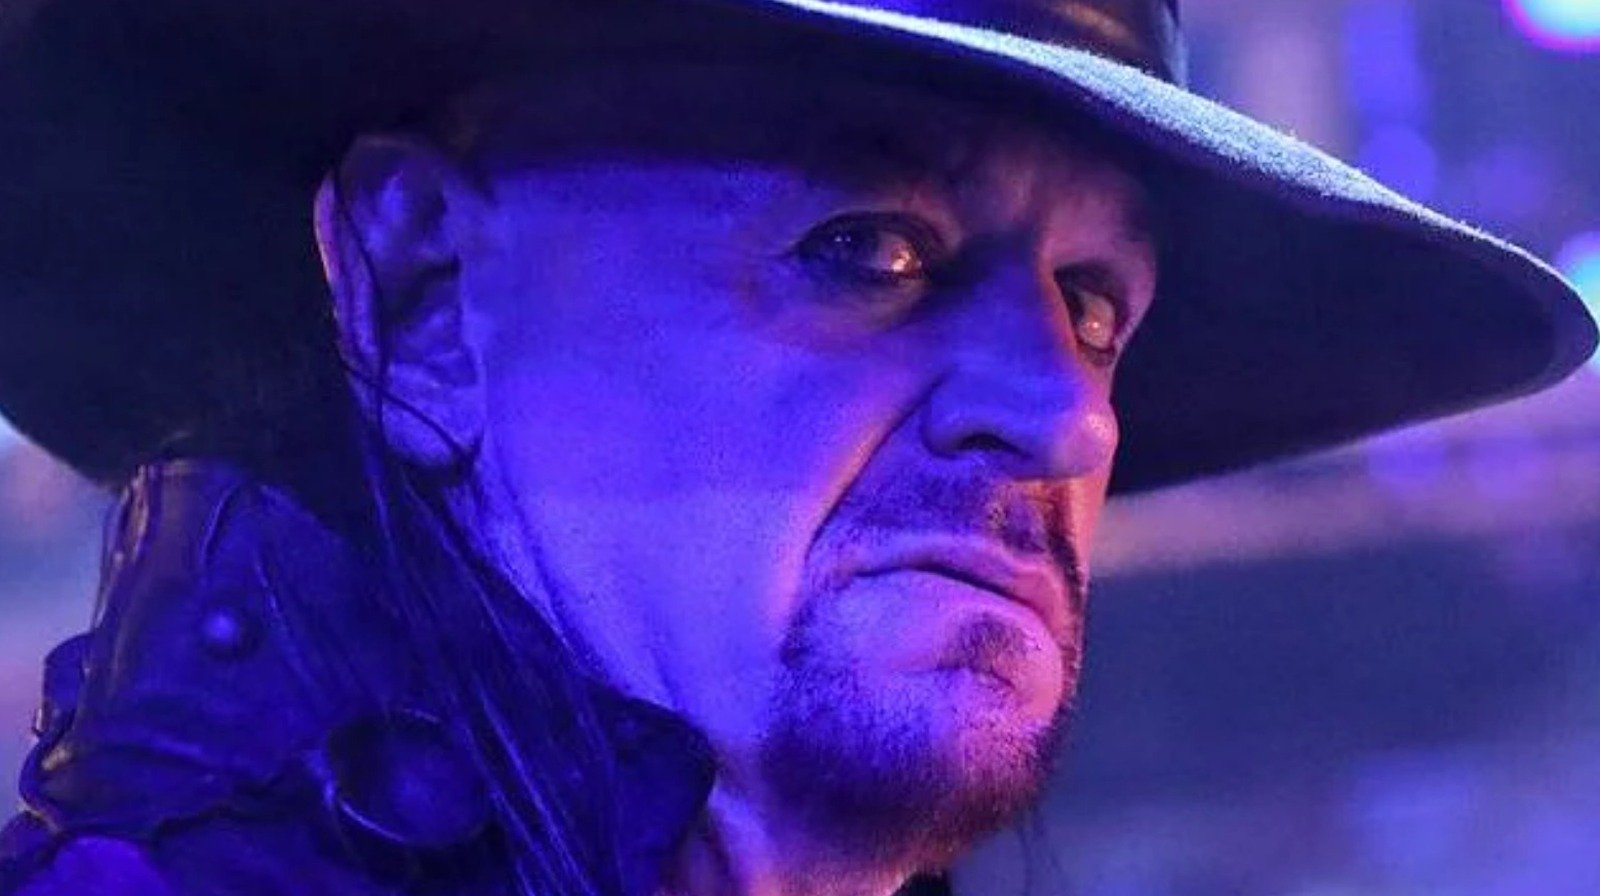 Facts About The Undertaker Only Hardcore Fans Will Know - Wrestling Inc.